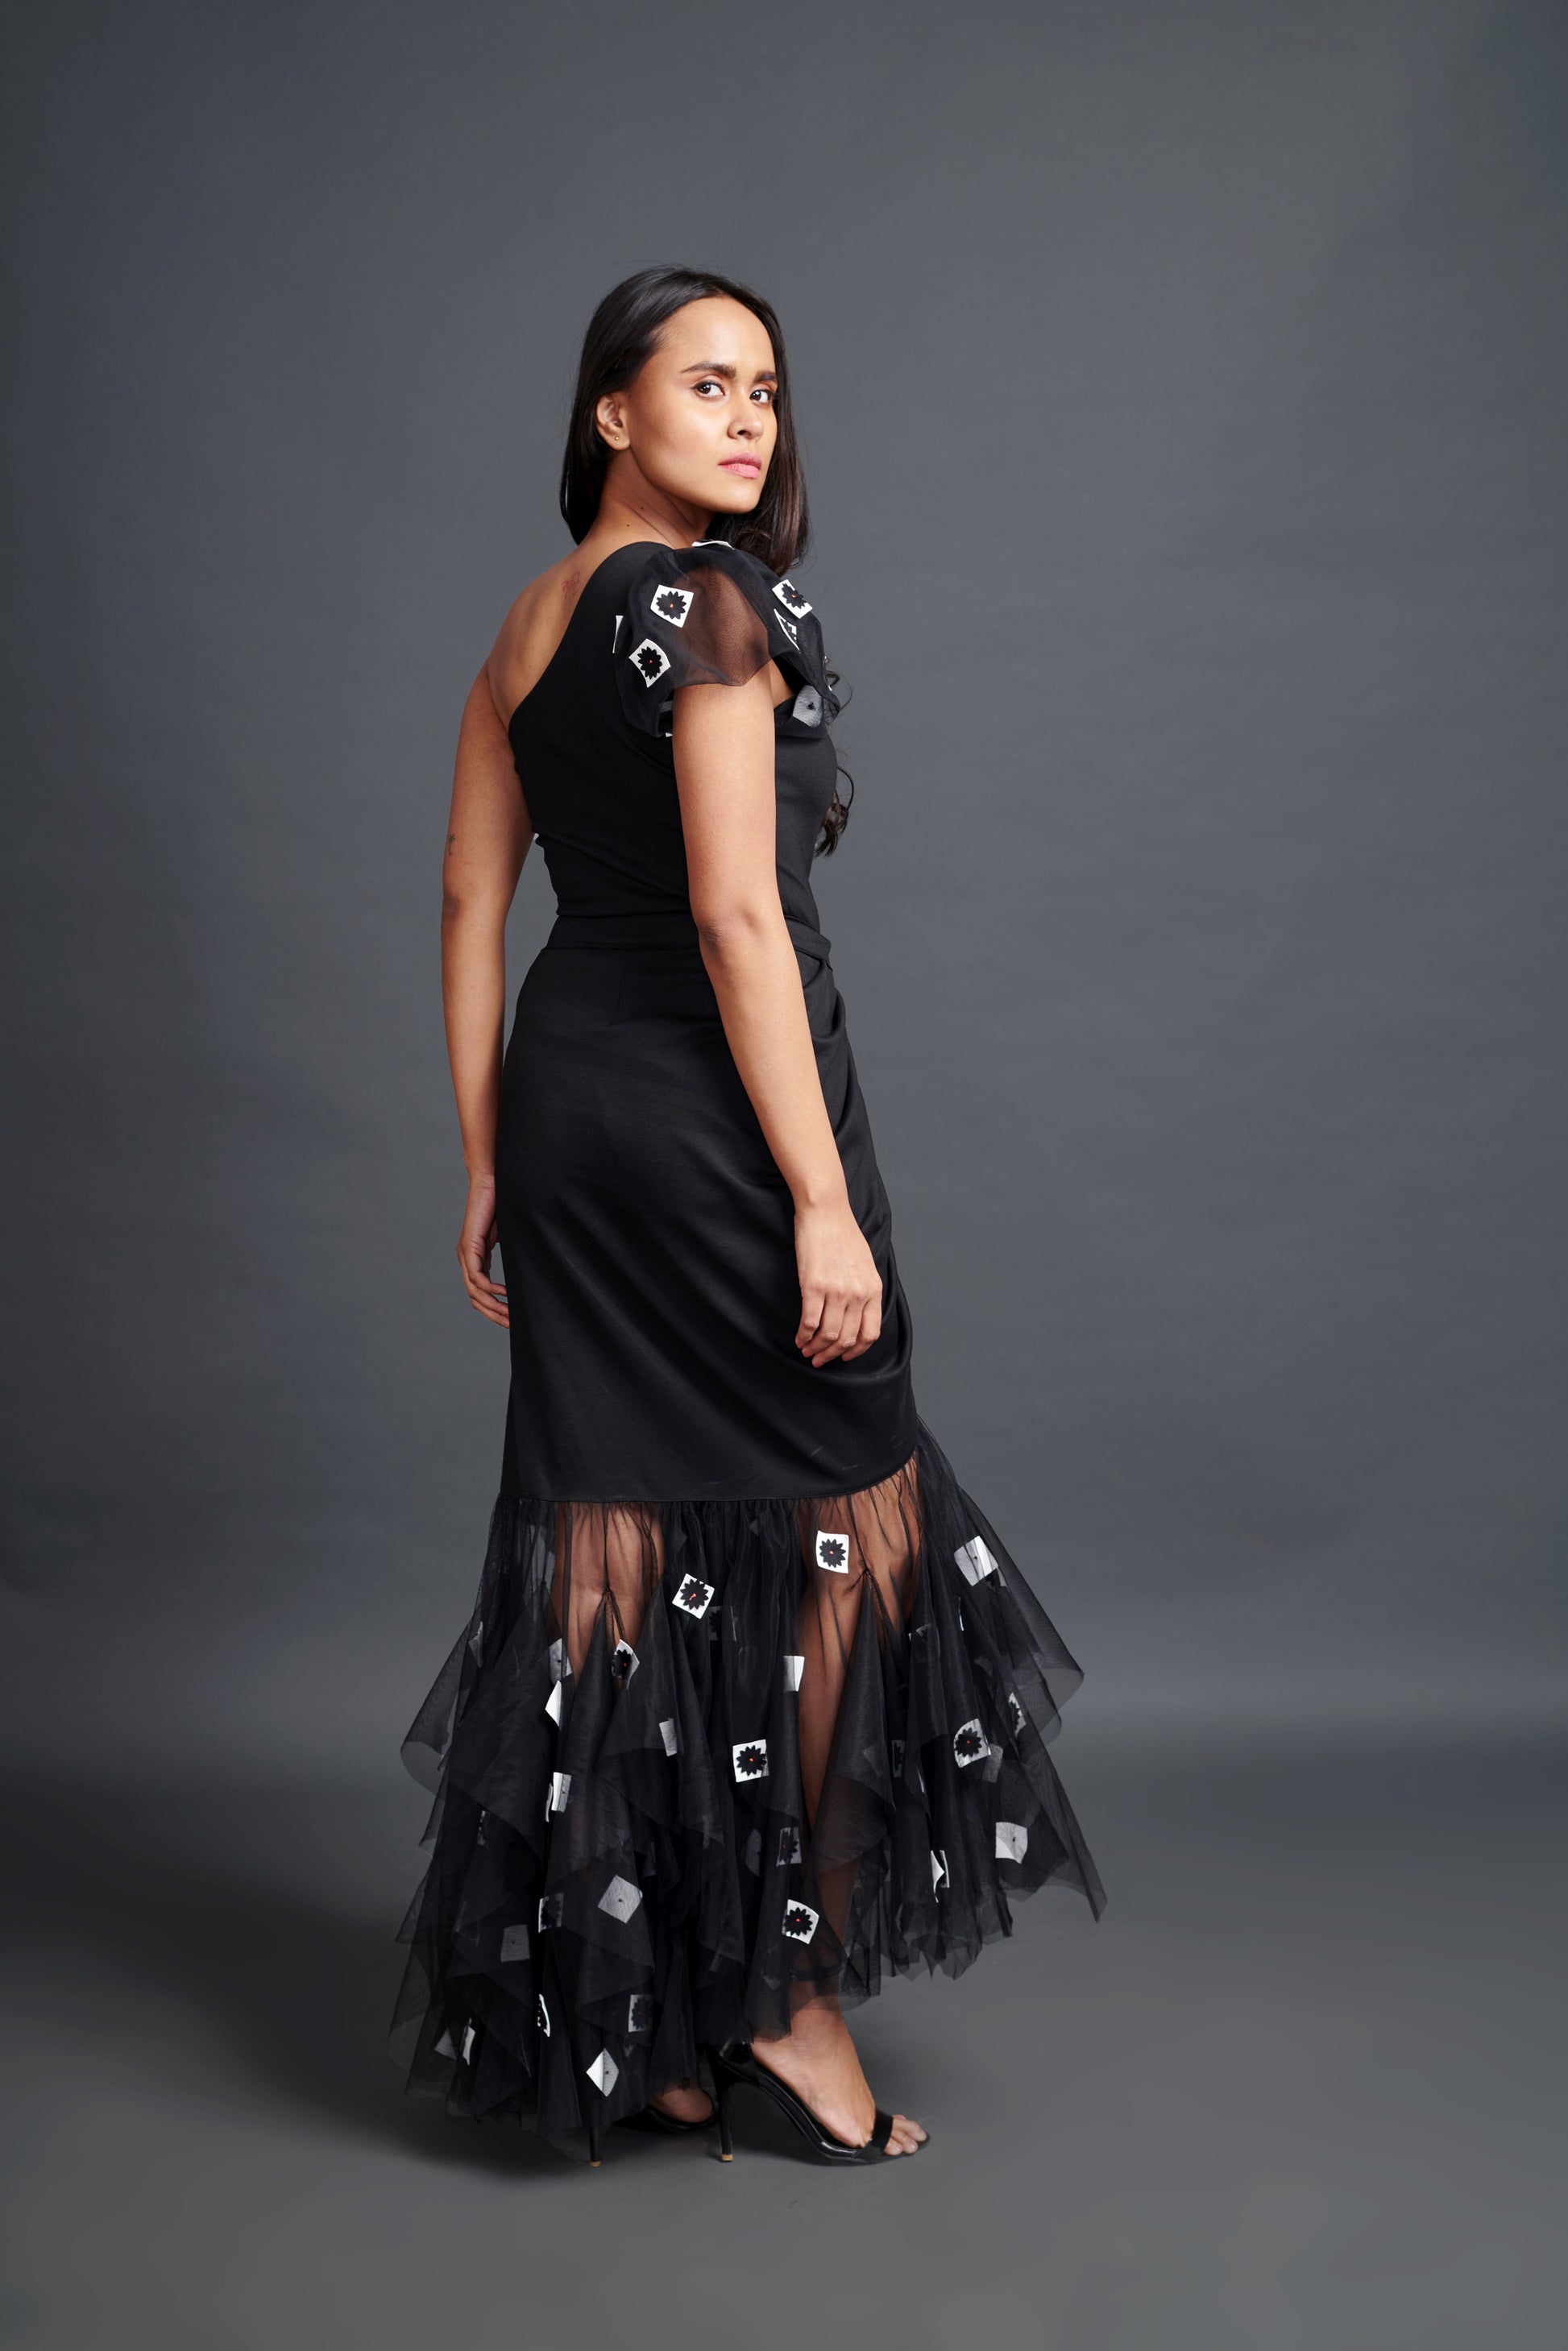 Image of BLACK ONE SHOULDER BODY SUIT WITH CONFETTI DETAILING ON A HIGH-LOW LONG SKIRT. From savoirfashions.com